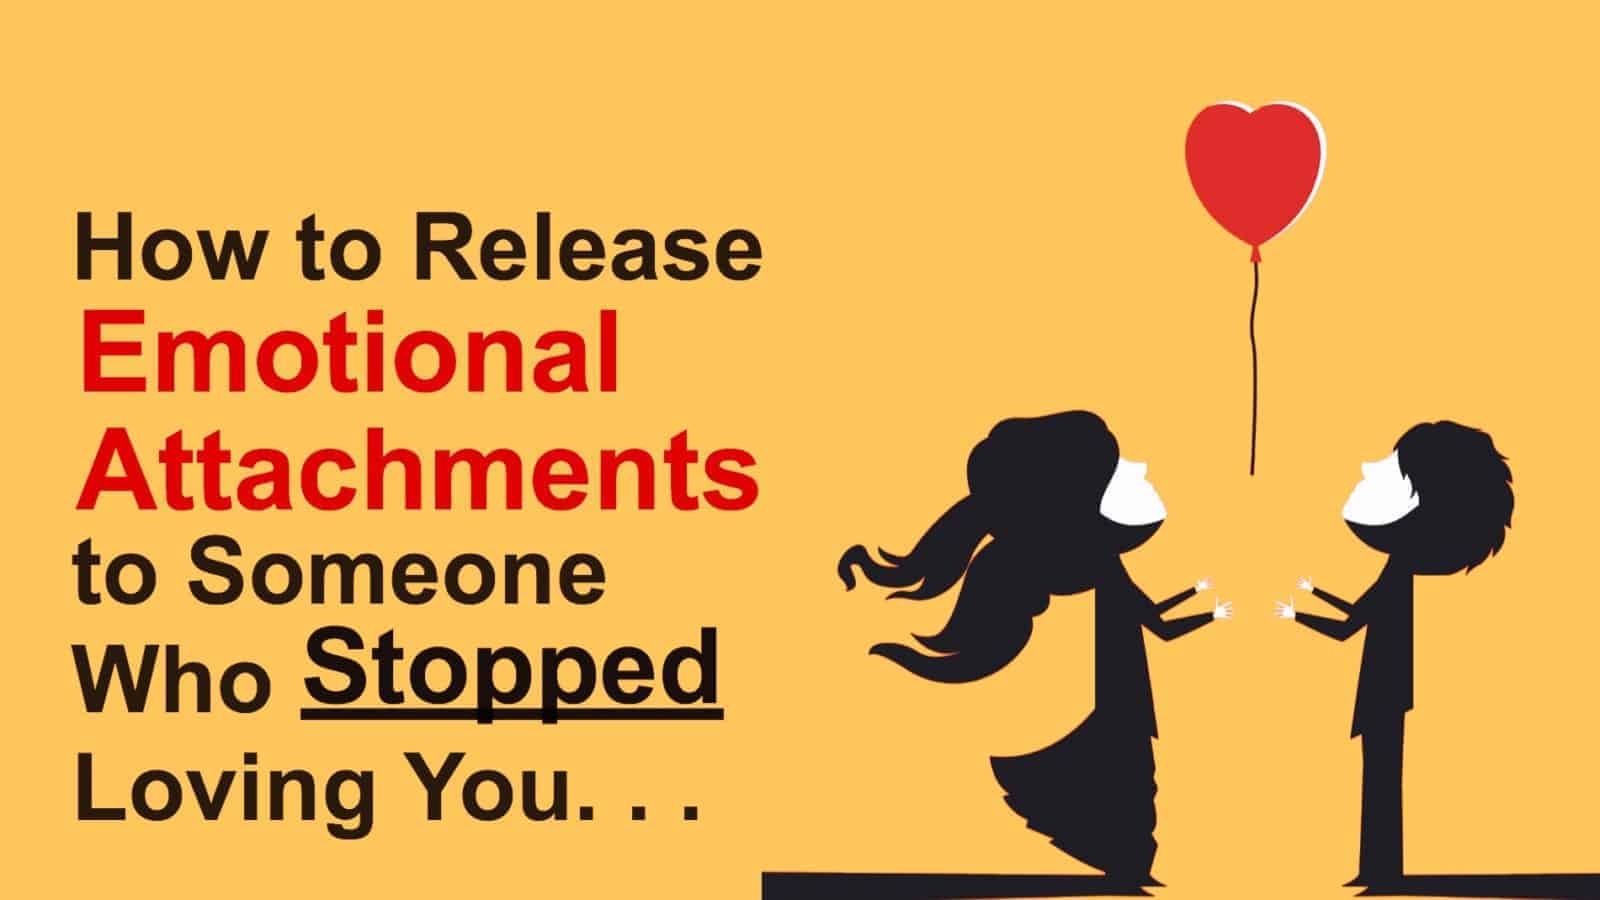 How to Release Emotional Attachments to Someone Who Stopped Loving You